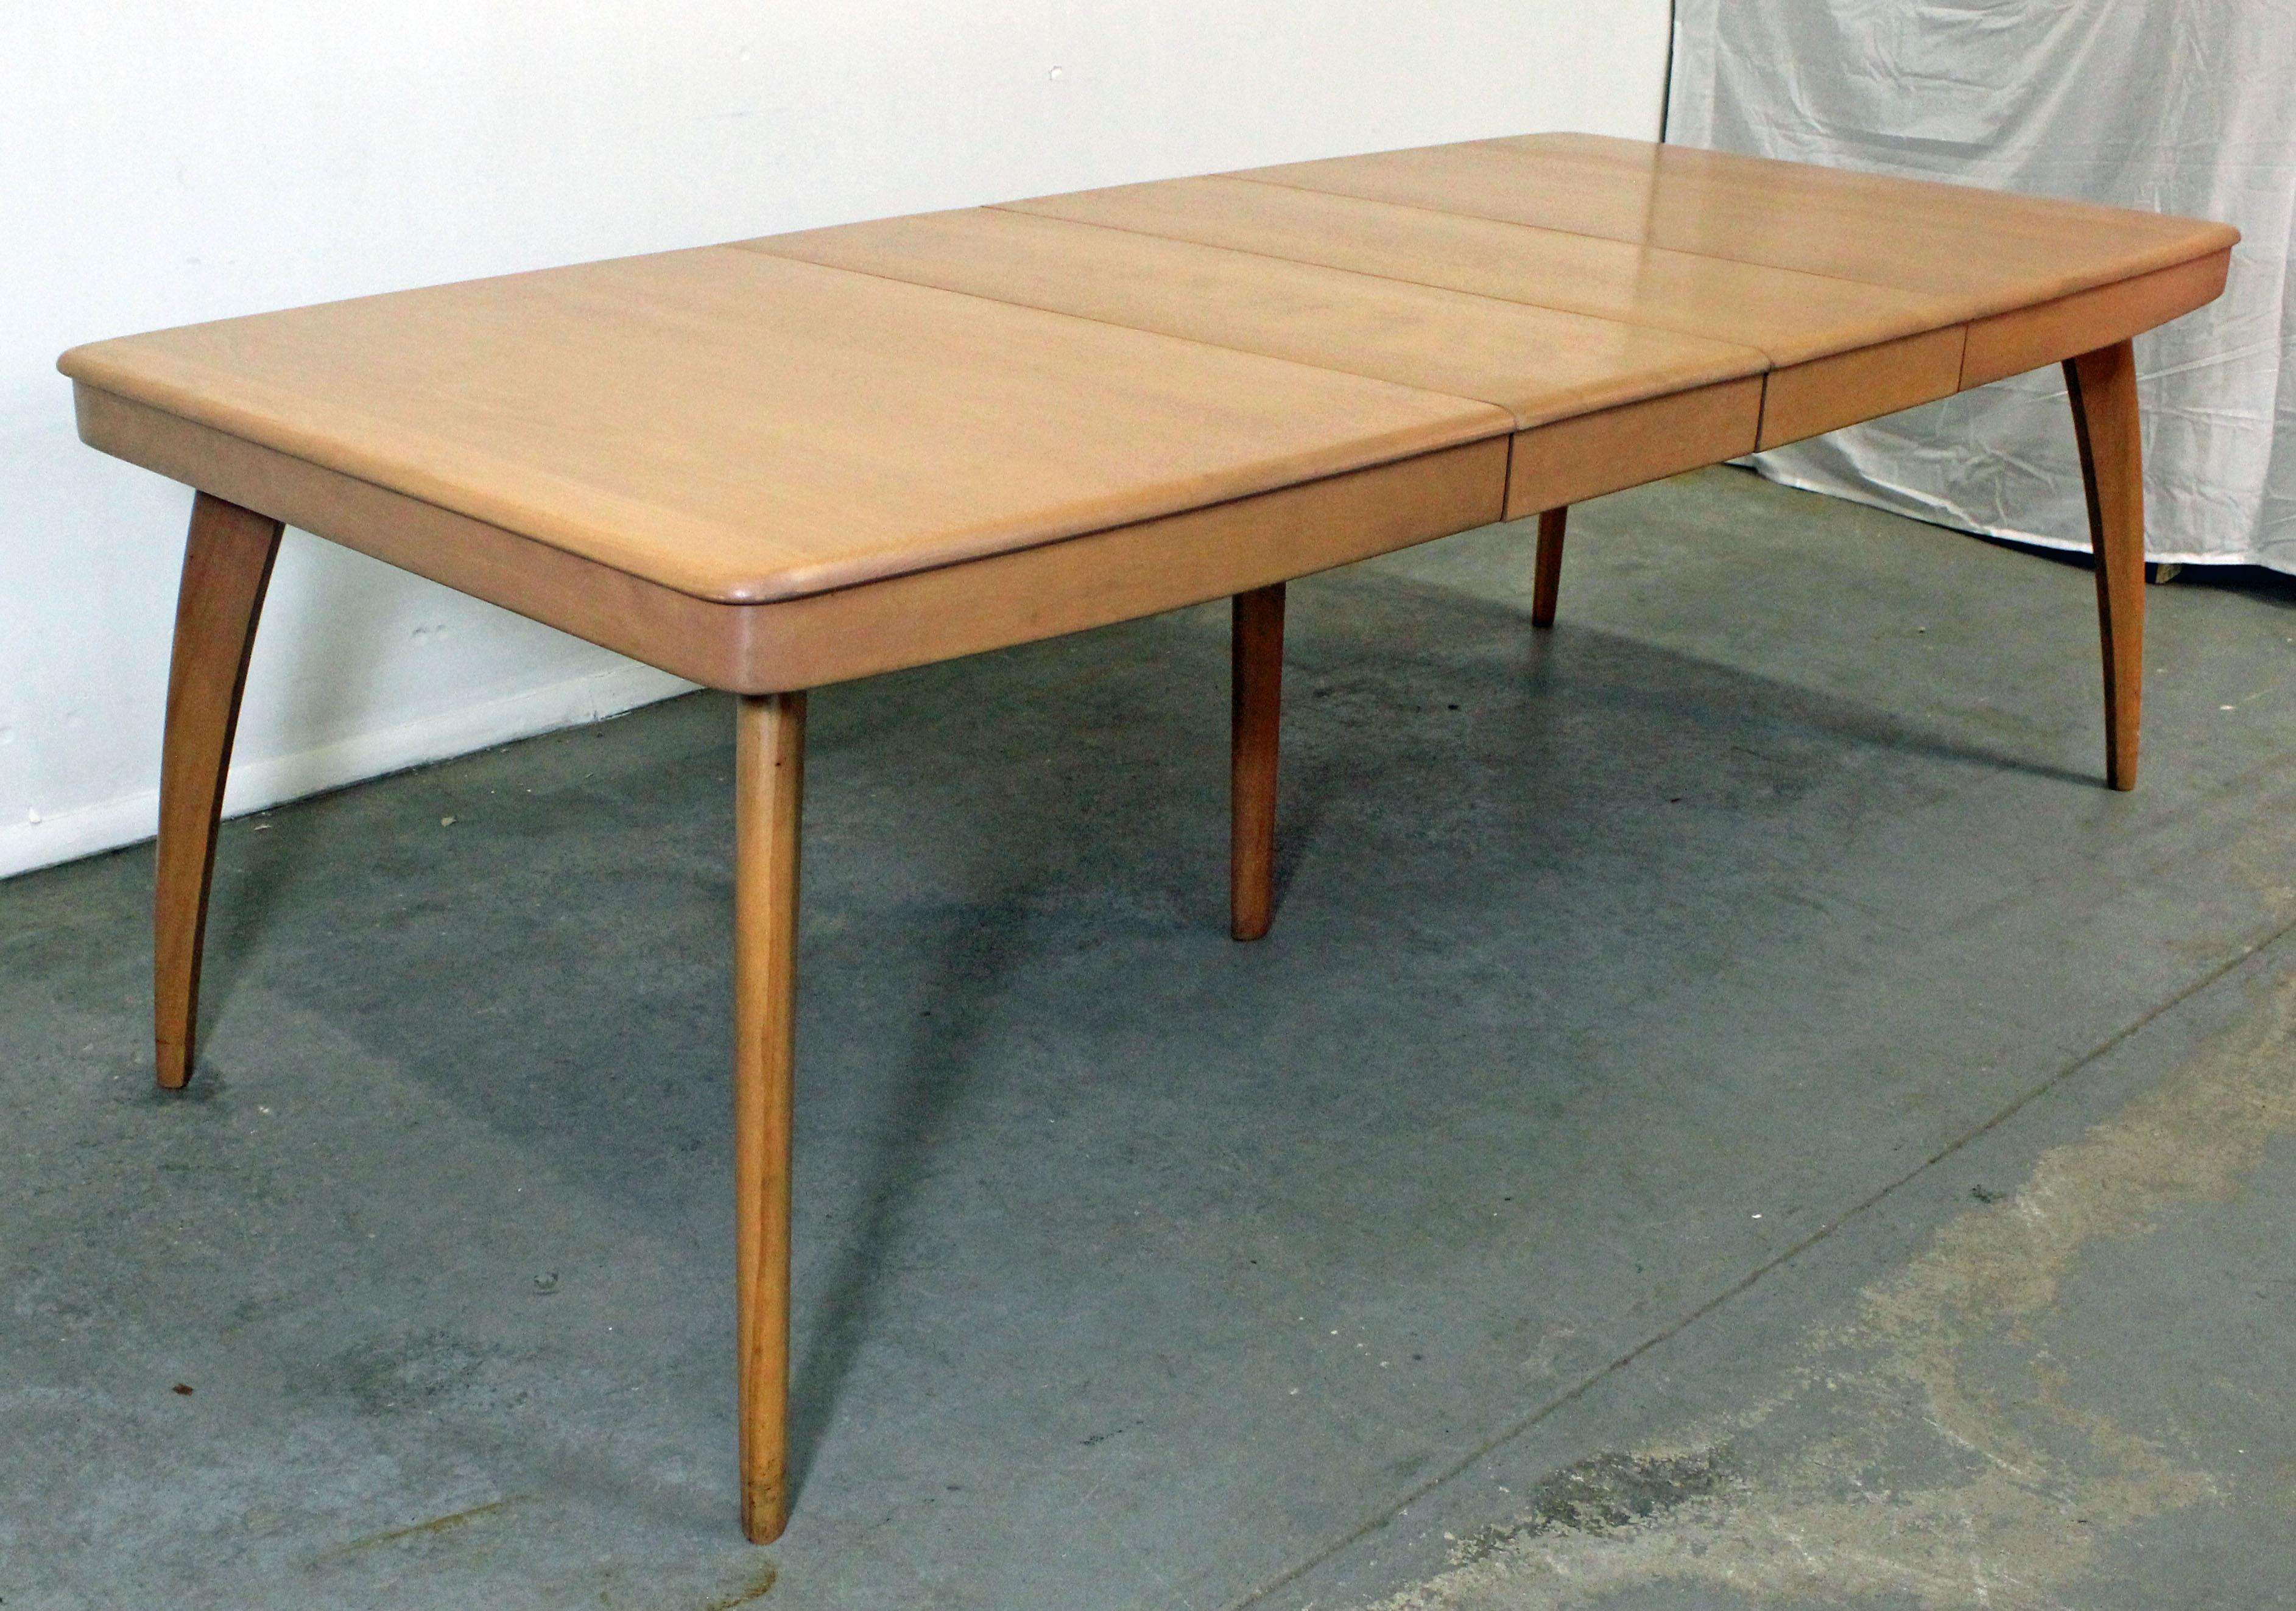 American Mid-Century Modern Heywood-Wakefield Champagne Extendable Dining Table